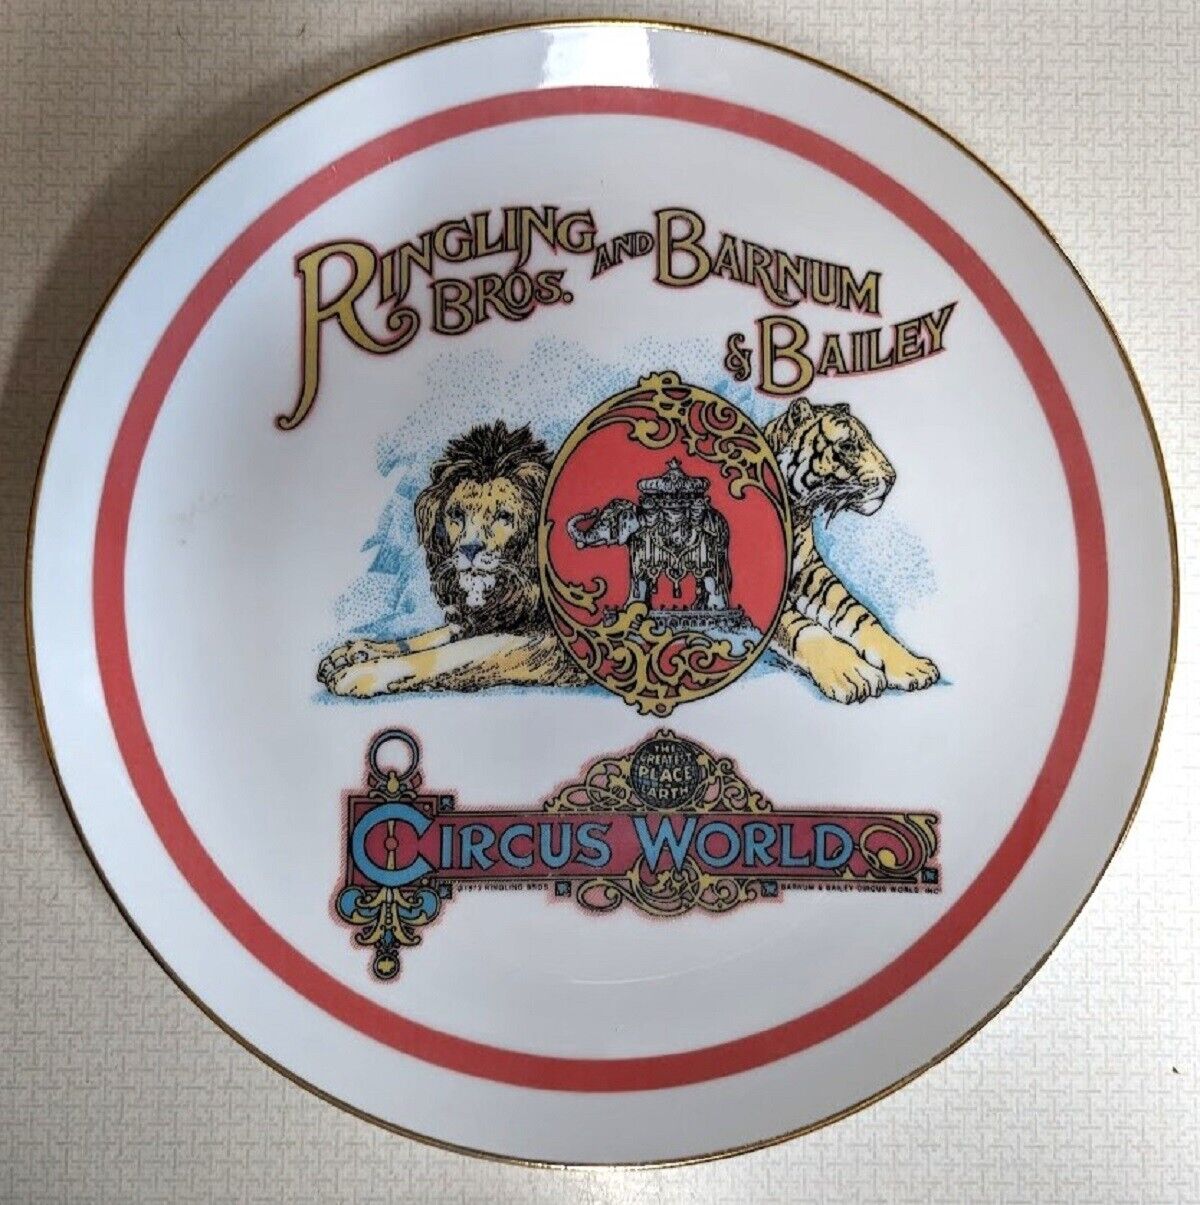 Ringling Brothers and Barnum & Bailey Circus World Limited Edition Plate 1978